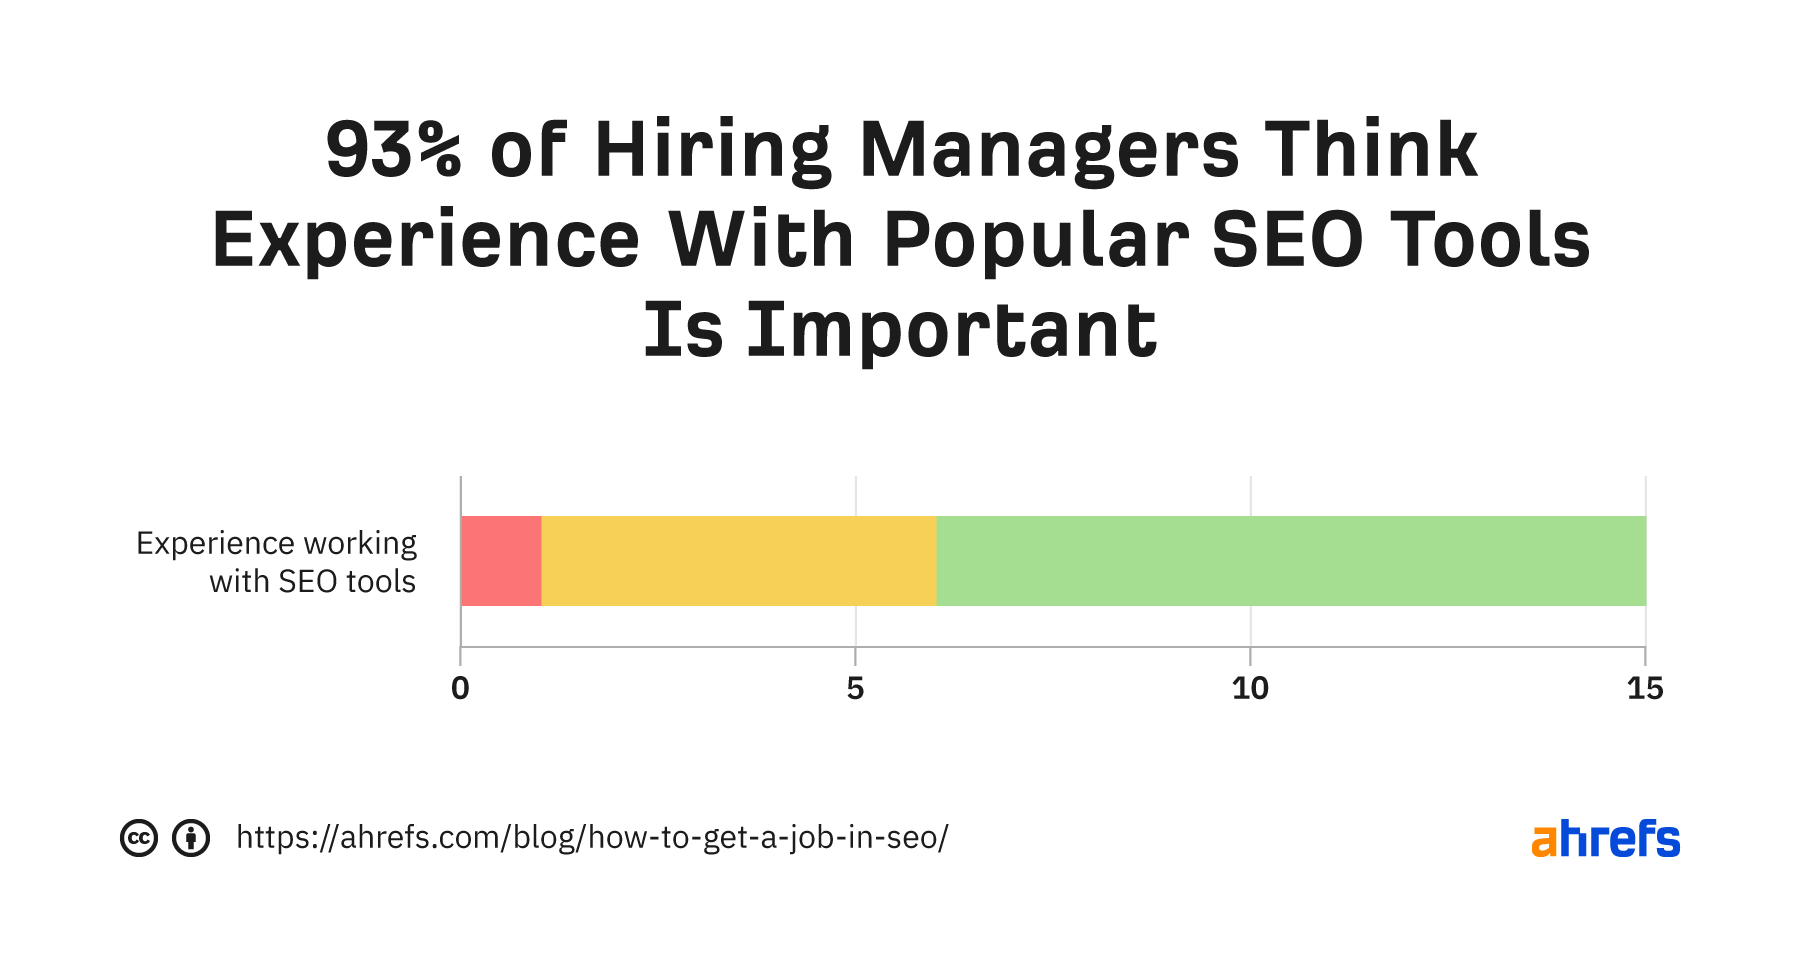 Most hiring managers think experience with popular tools is important